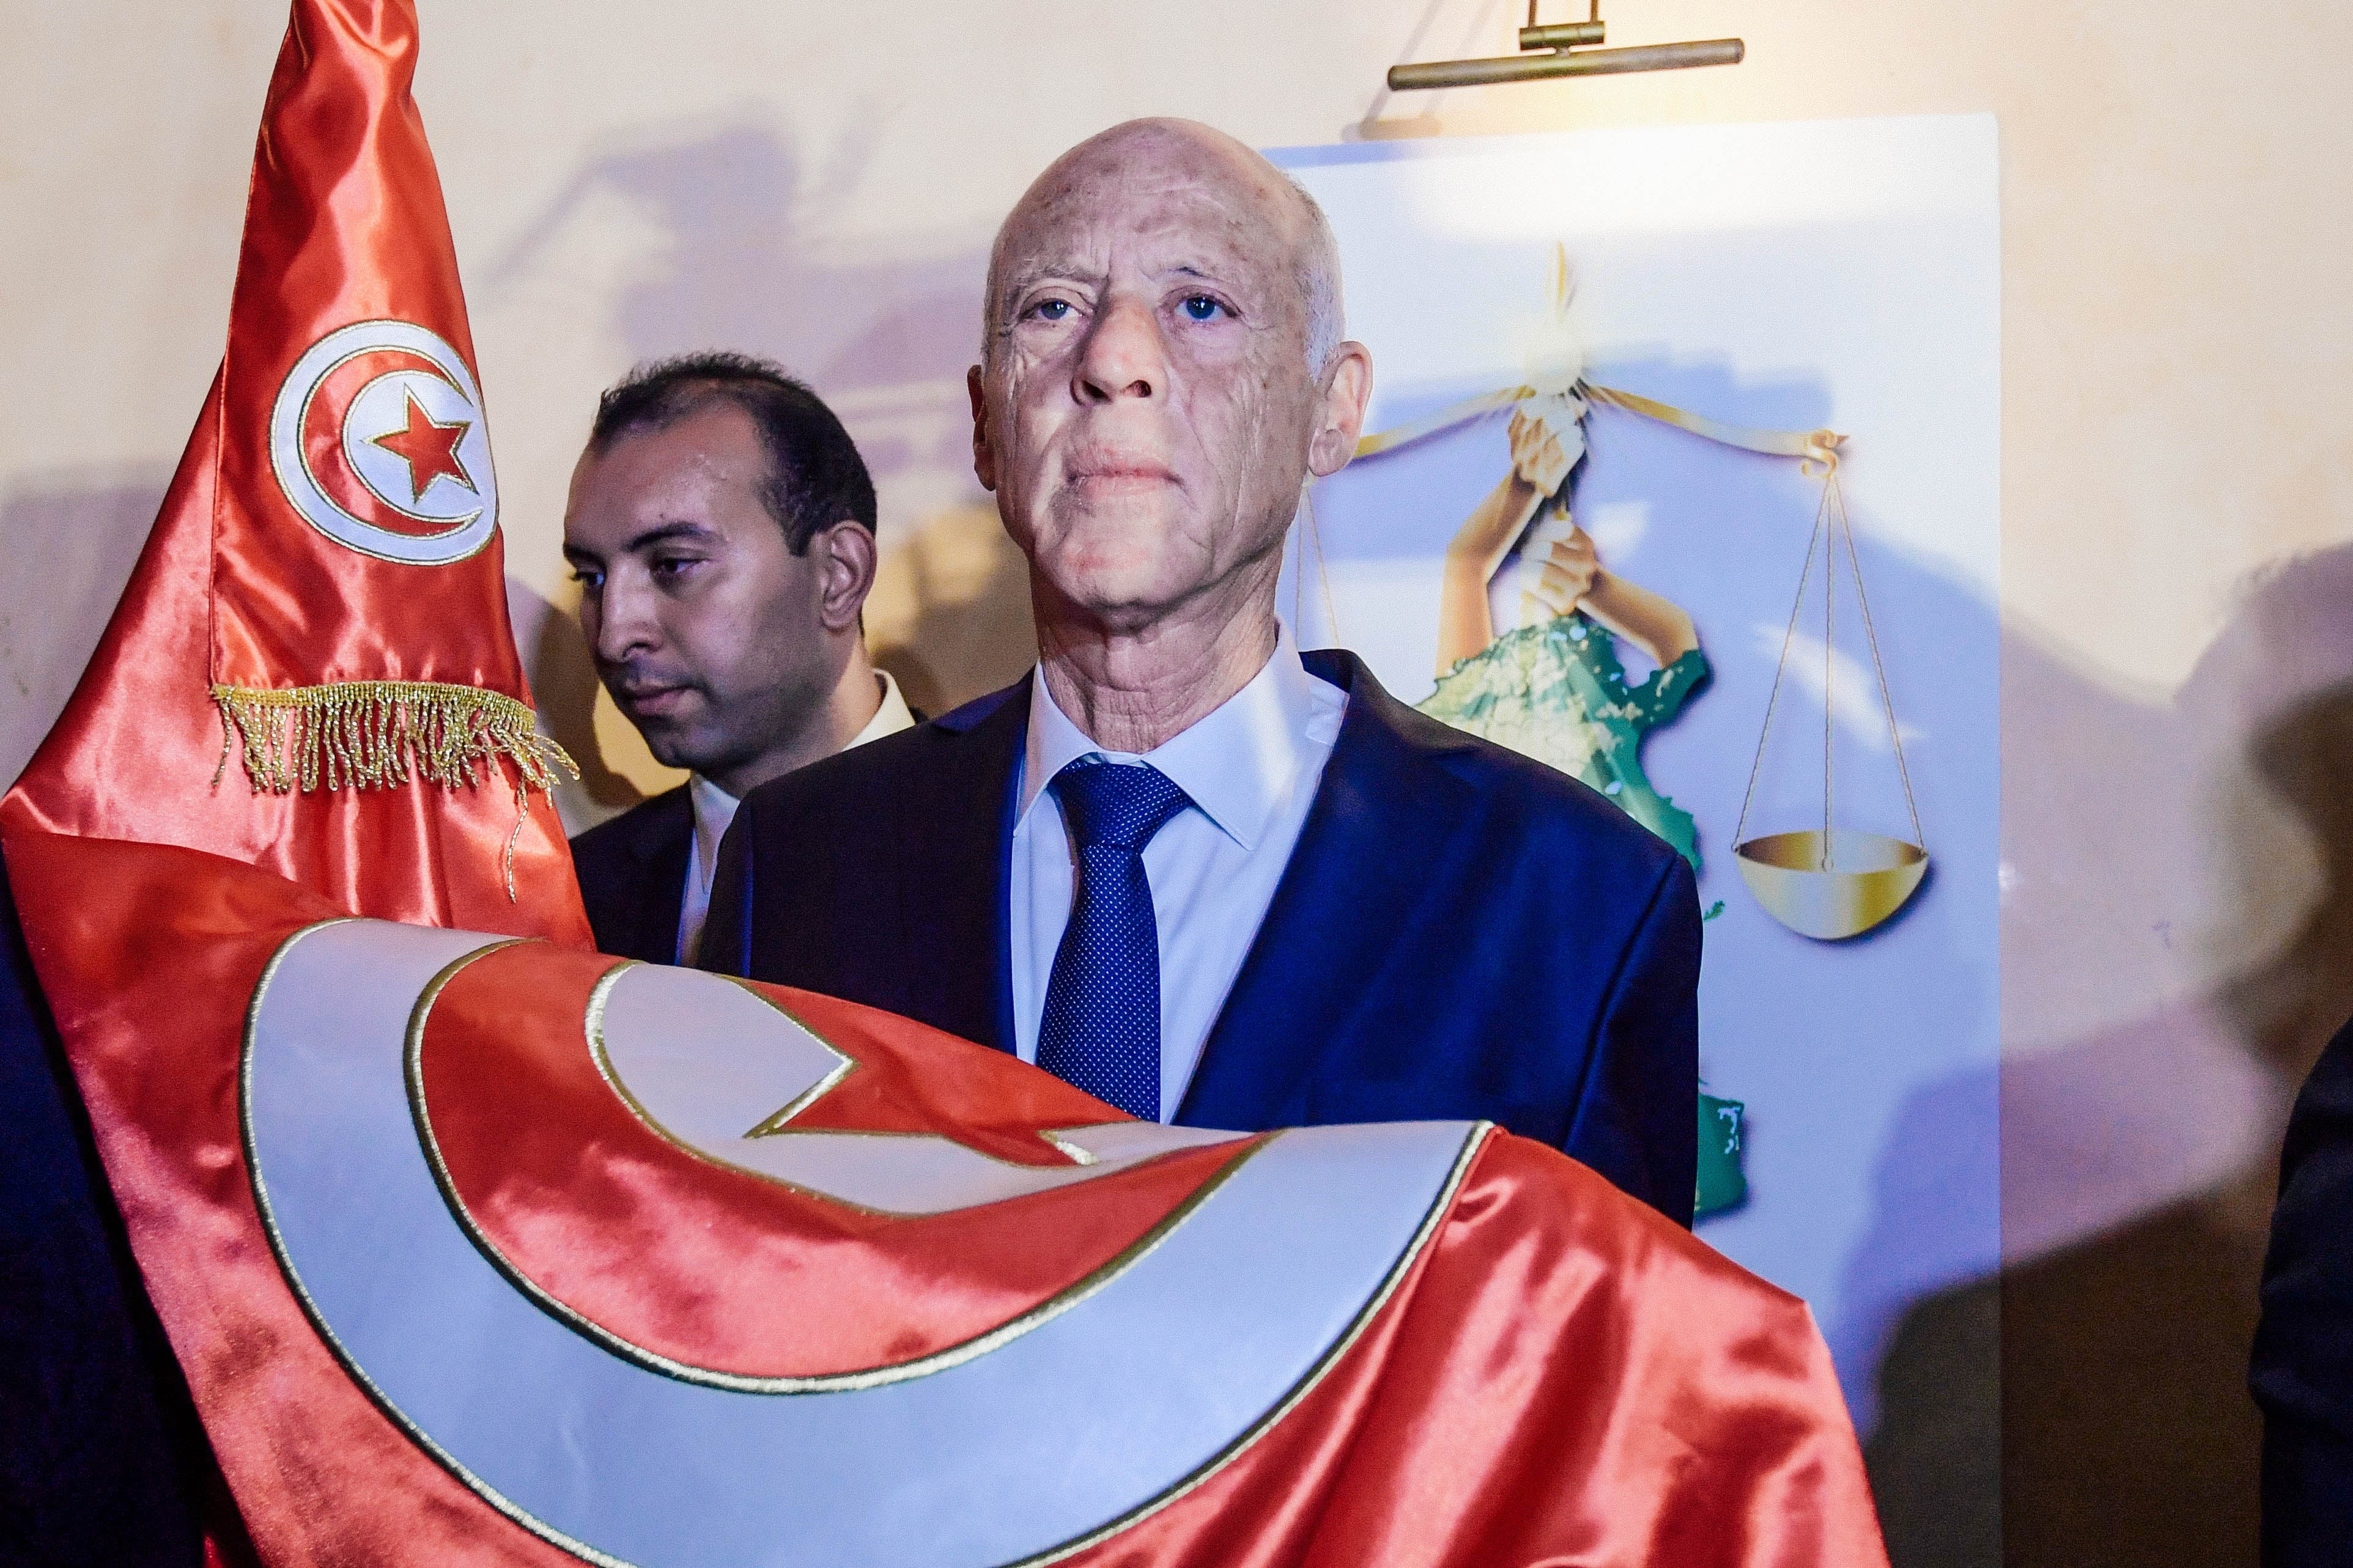 Kais Saied holds the Tunisian flag in his hands.